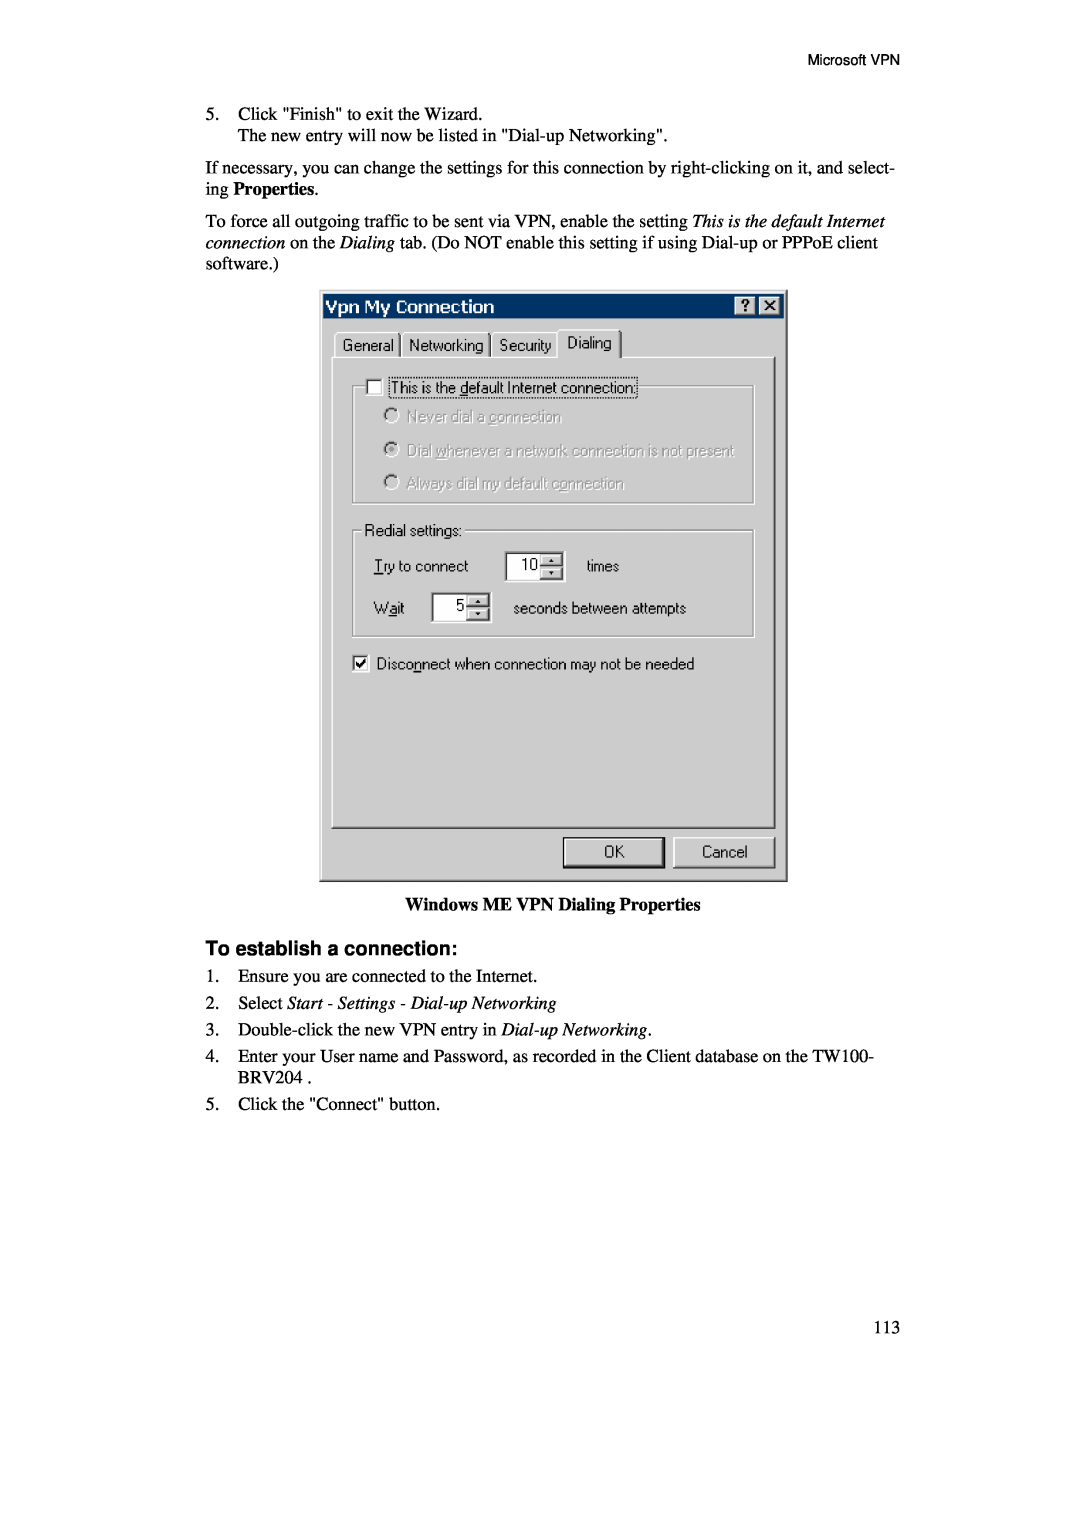 TRENDnet BRV204 To establish a connection, Windows ME VPN Dialing Properties, Select Start - Settings - Dial-up Networking 